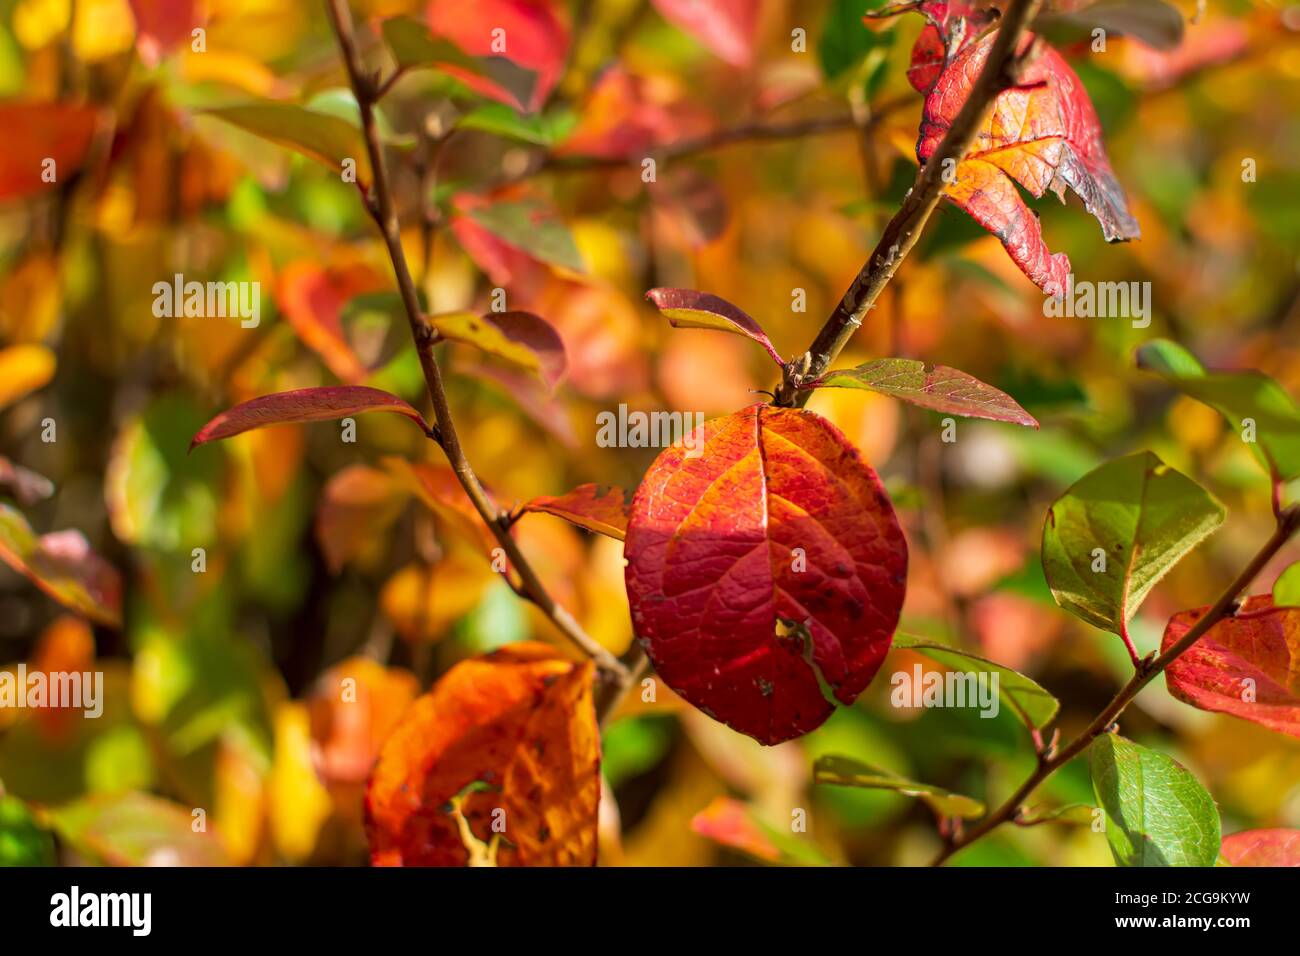 Orange red yellow shiny cotoneaster (Cotoneaster lucidus) leaves background Stock Photo